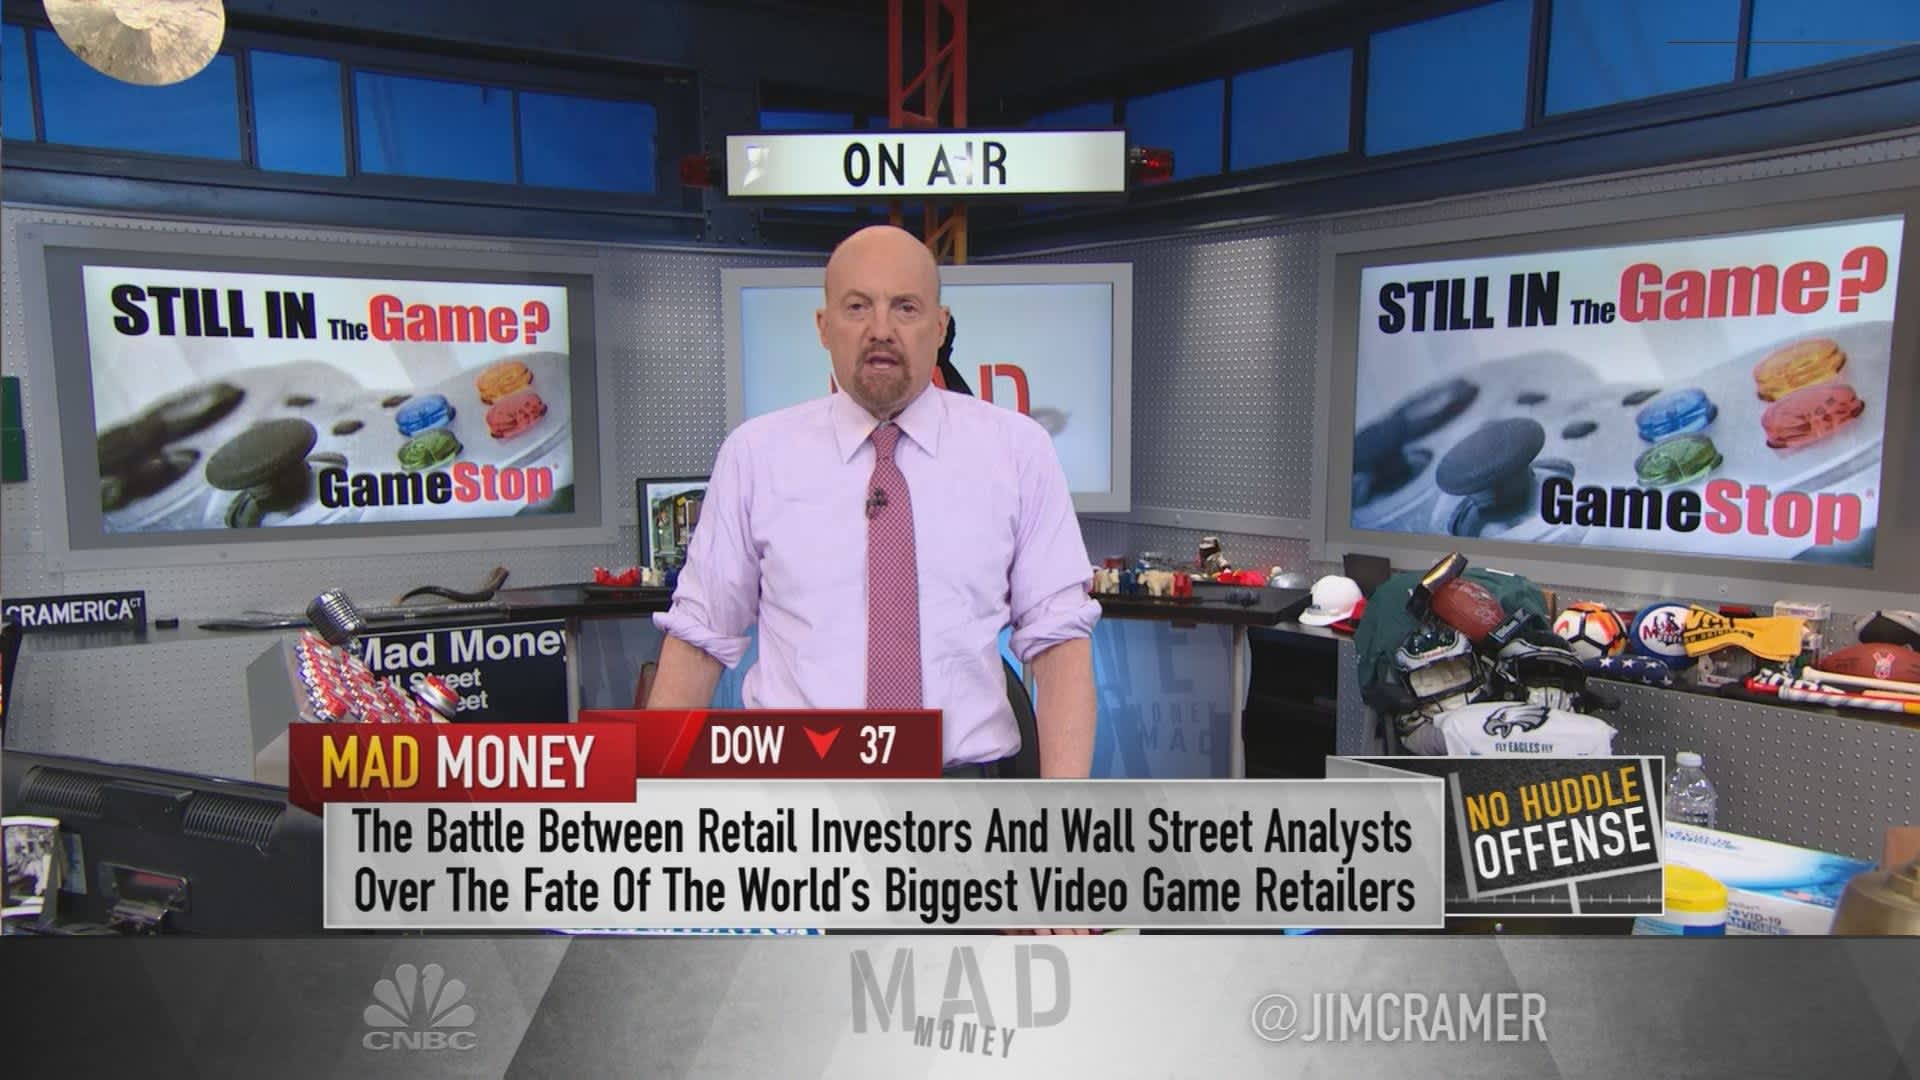 Cramer urges caution on GameStop, says there are 'easier ways to make money